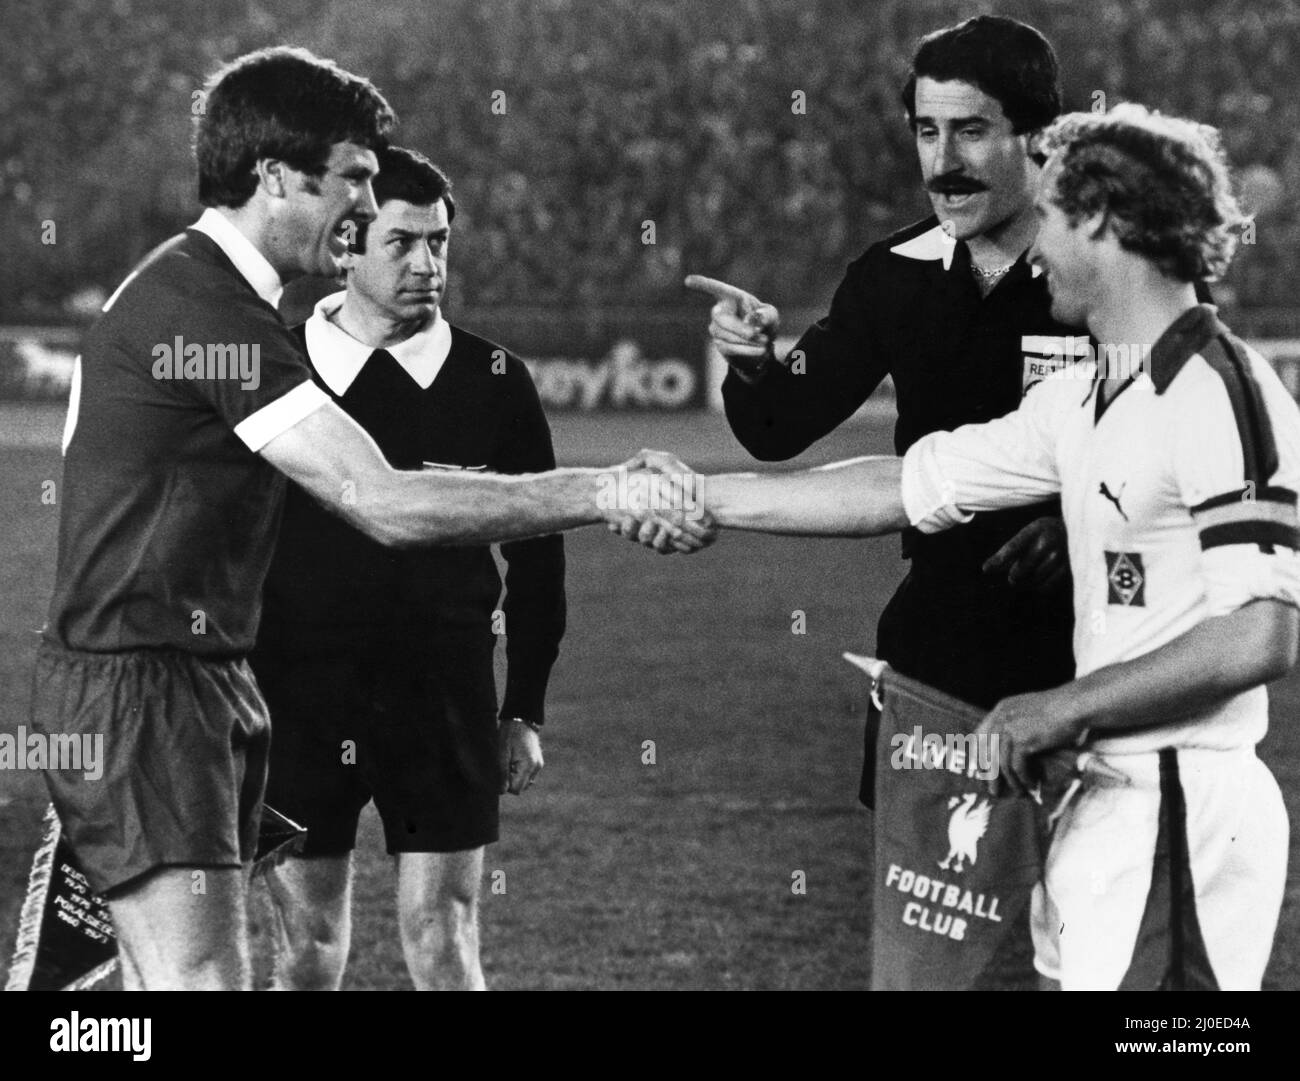 European Cup Semi Final First leg match at the Rheinstadion, Dusseldorf. Borussia Moenchengladbach 2  v Liverpool 1. Liverppol captain Emlyn Hughes shakes hands with Moenchengladbach captain Berti Vogts during the exchange of pennants before kick off.  The German team went on to win the match two one but Liverpool won the second leg at Anfield 3-0 to progress to their second consecutive European Cup Final. 29th March 1978. Stock Photo